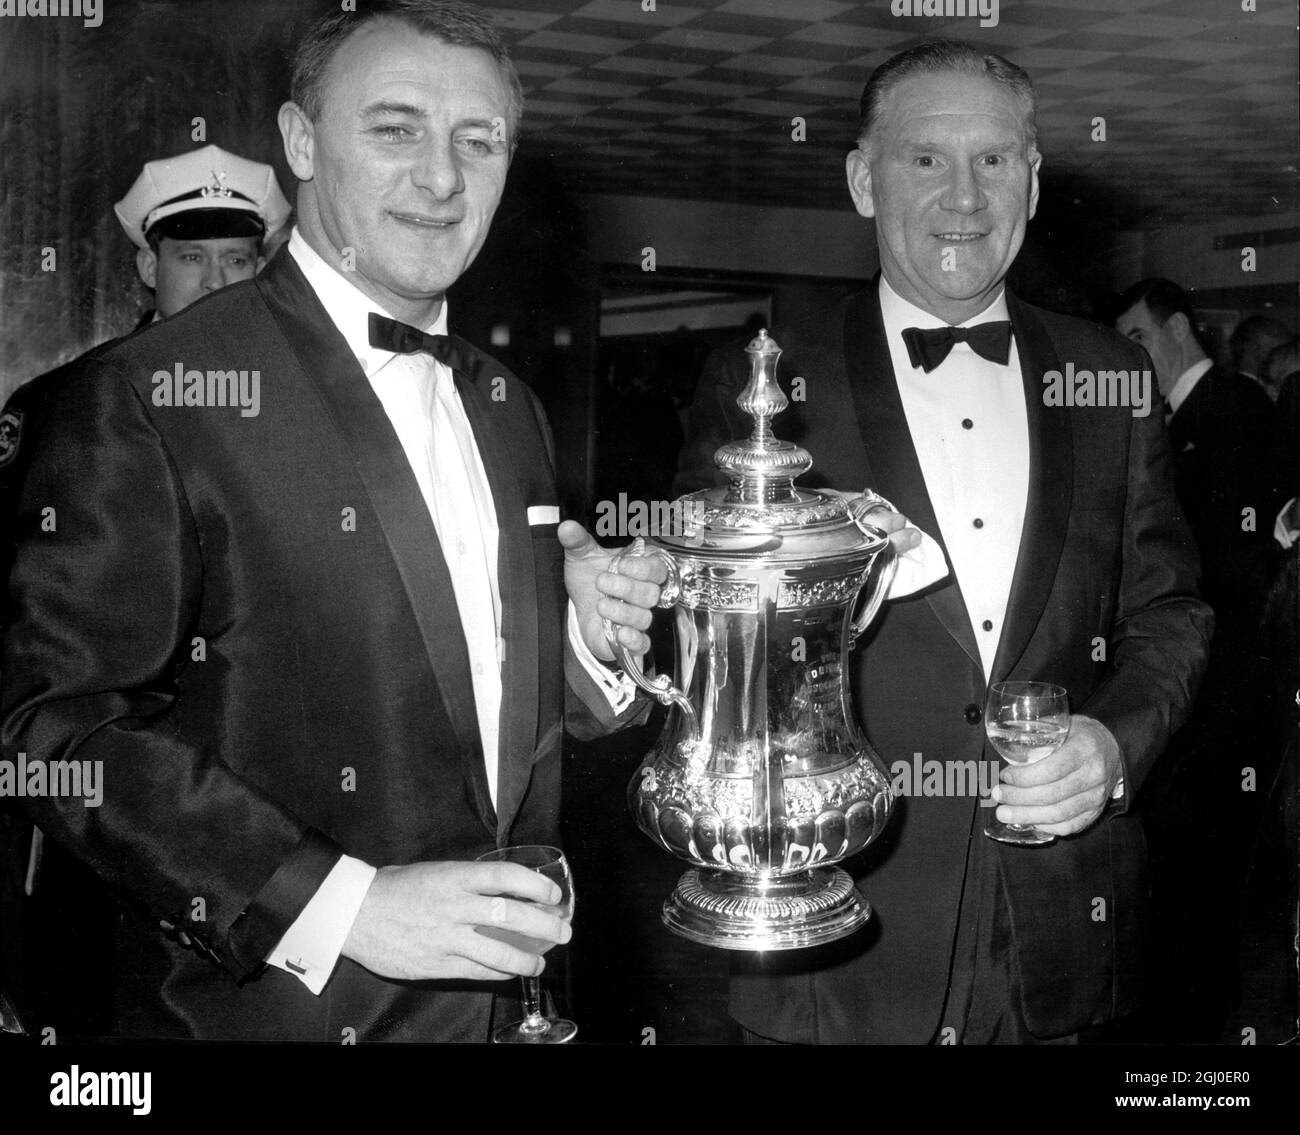 Chelsea Manager Tommy Docherty (left) and Tottenham Hotspur Manager Bill Nicholson hold the Football Association Cup between them and wonder which of them will be holding it after Saturday's FA Cup final between the two teams at Wembley. They are seen at the Boxing Dinner Evening in honour of the Chelsea and Spurs finalists in the London Hilton. 15th May 1967. Stock Photo